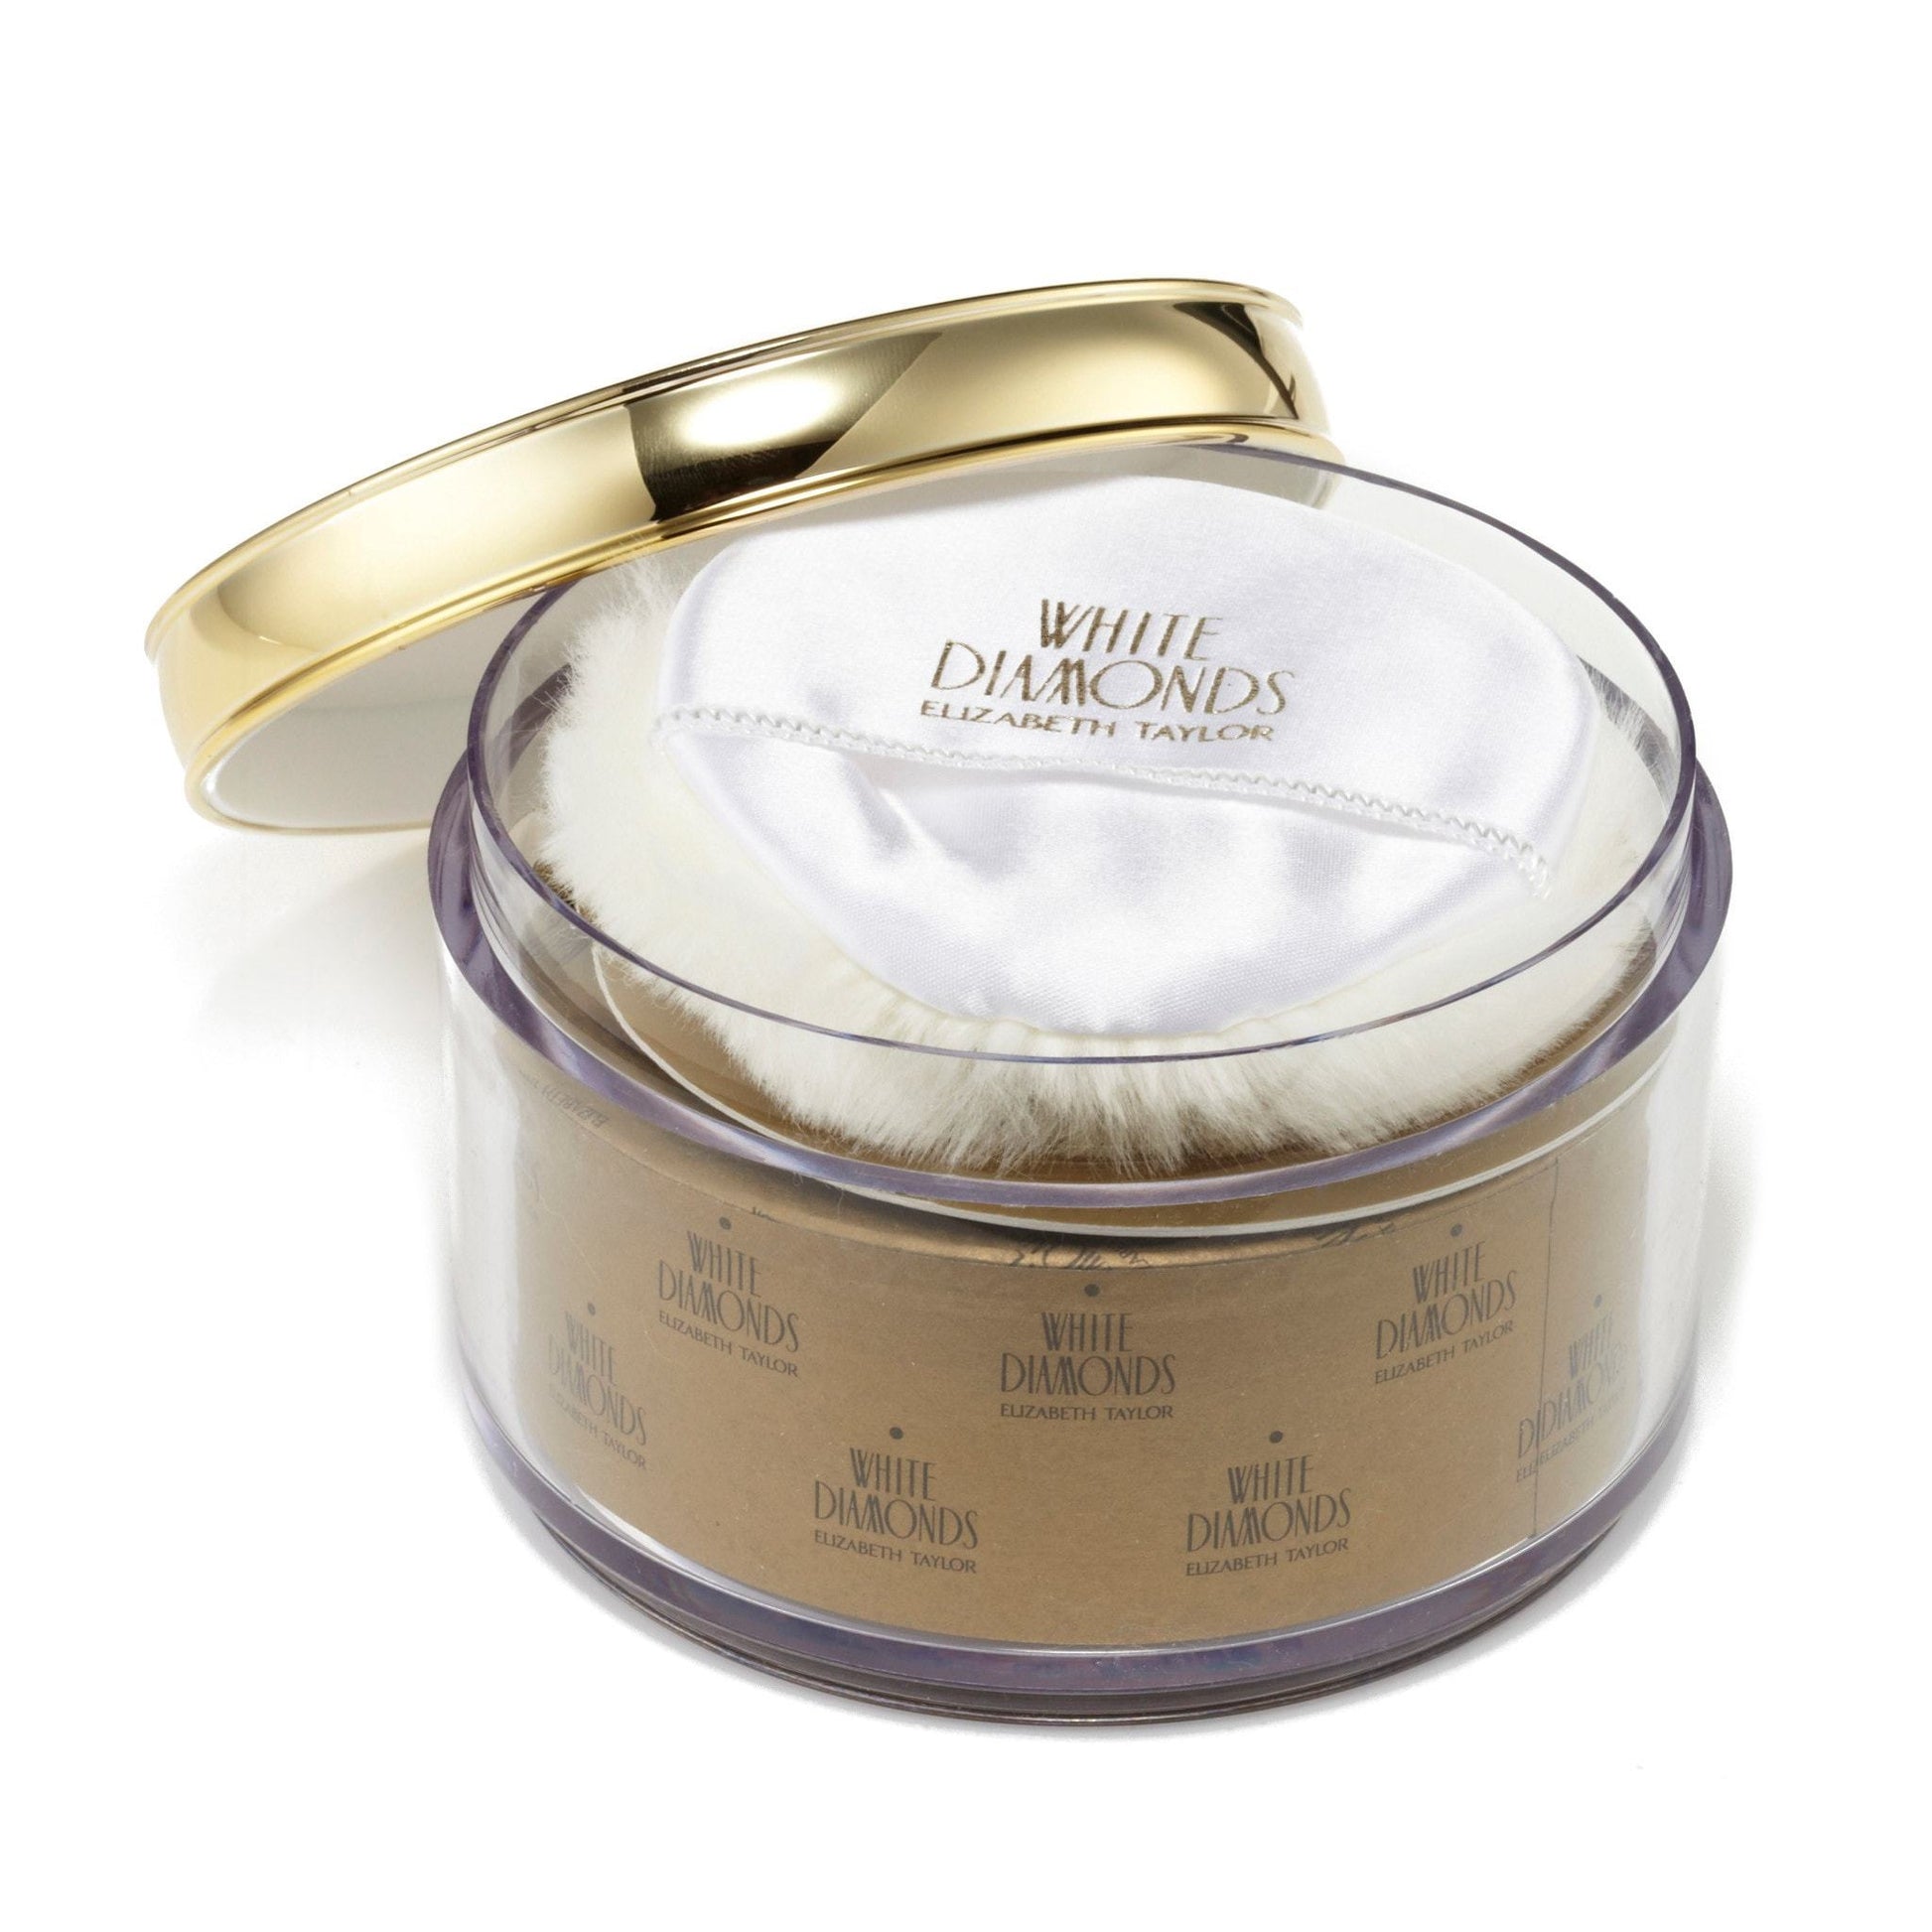 White Diamonds Dusting Powder for Women by Elizabeth Taylor, Product image 1